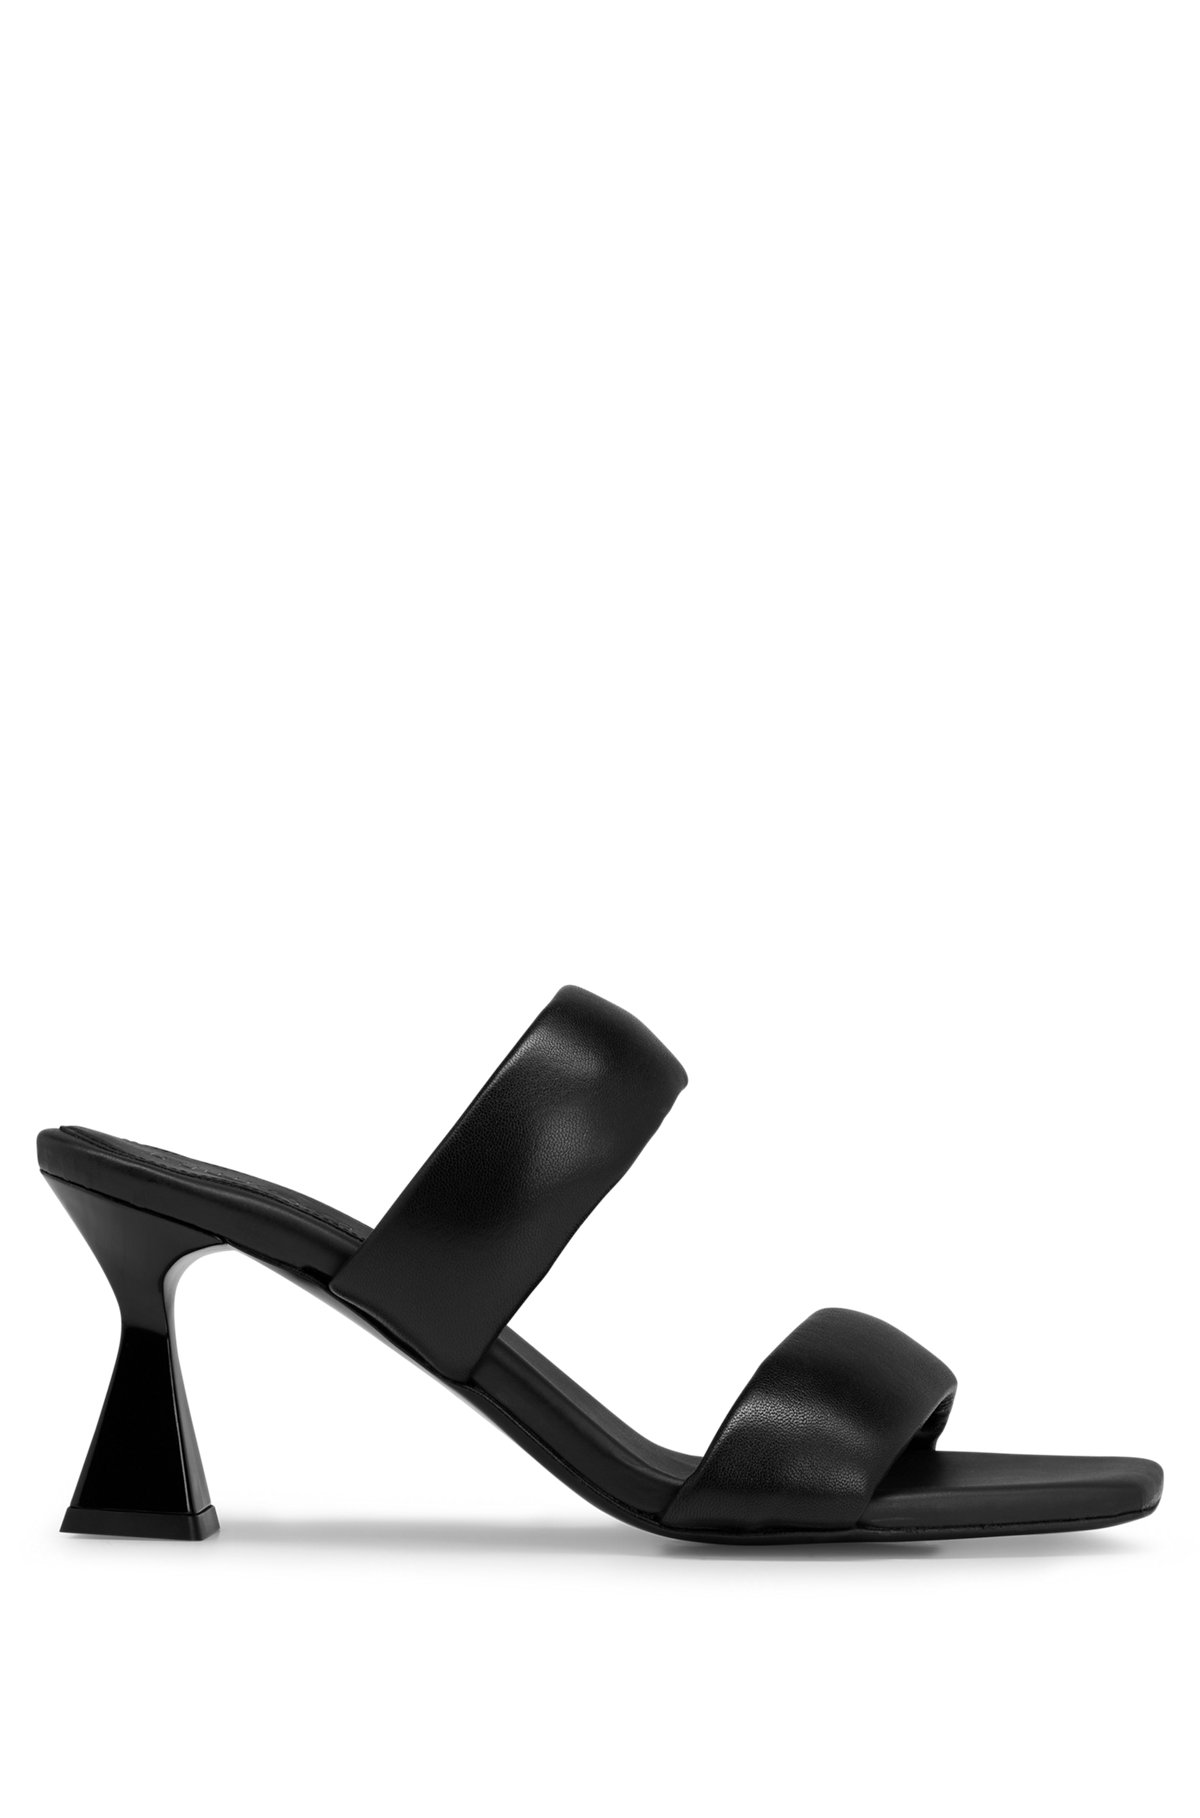 Nappa-leather sandals with flared heel, Black